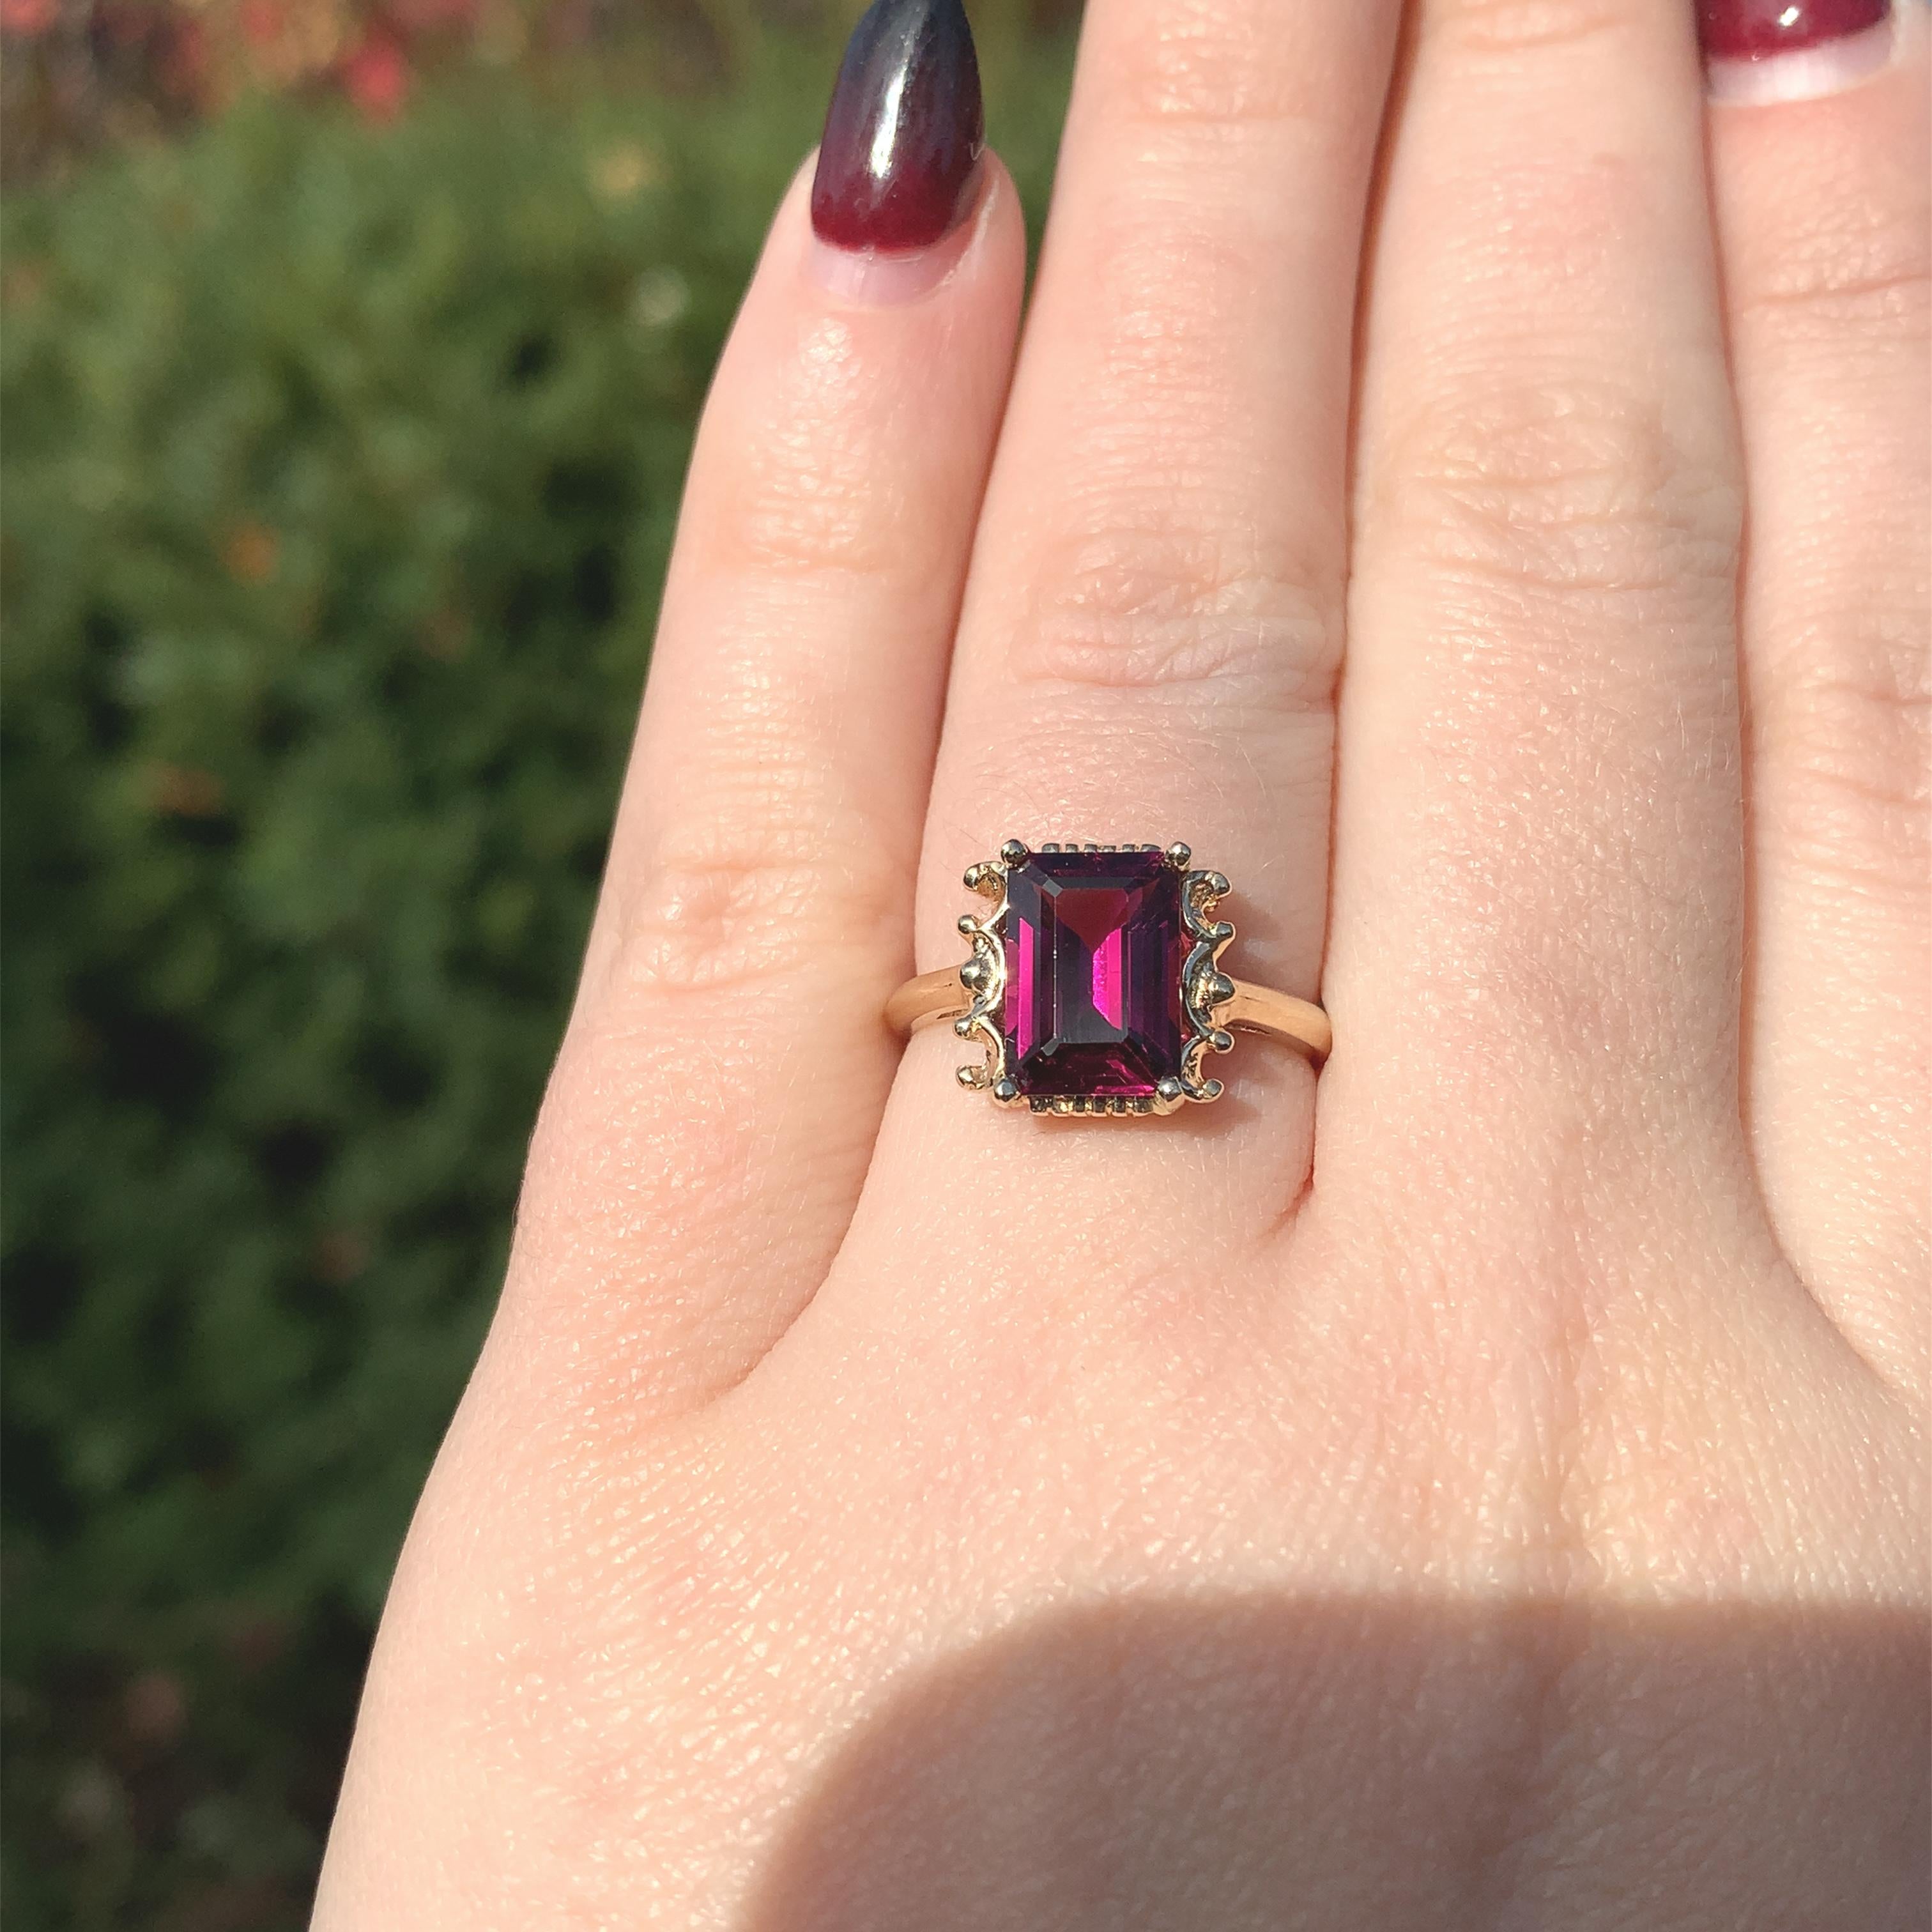 For Sale:  14K Yellow Gold Ring with Emerald Cut 3.51 carat Rhodolite Garnet 7